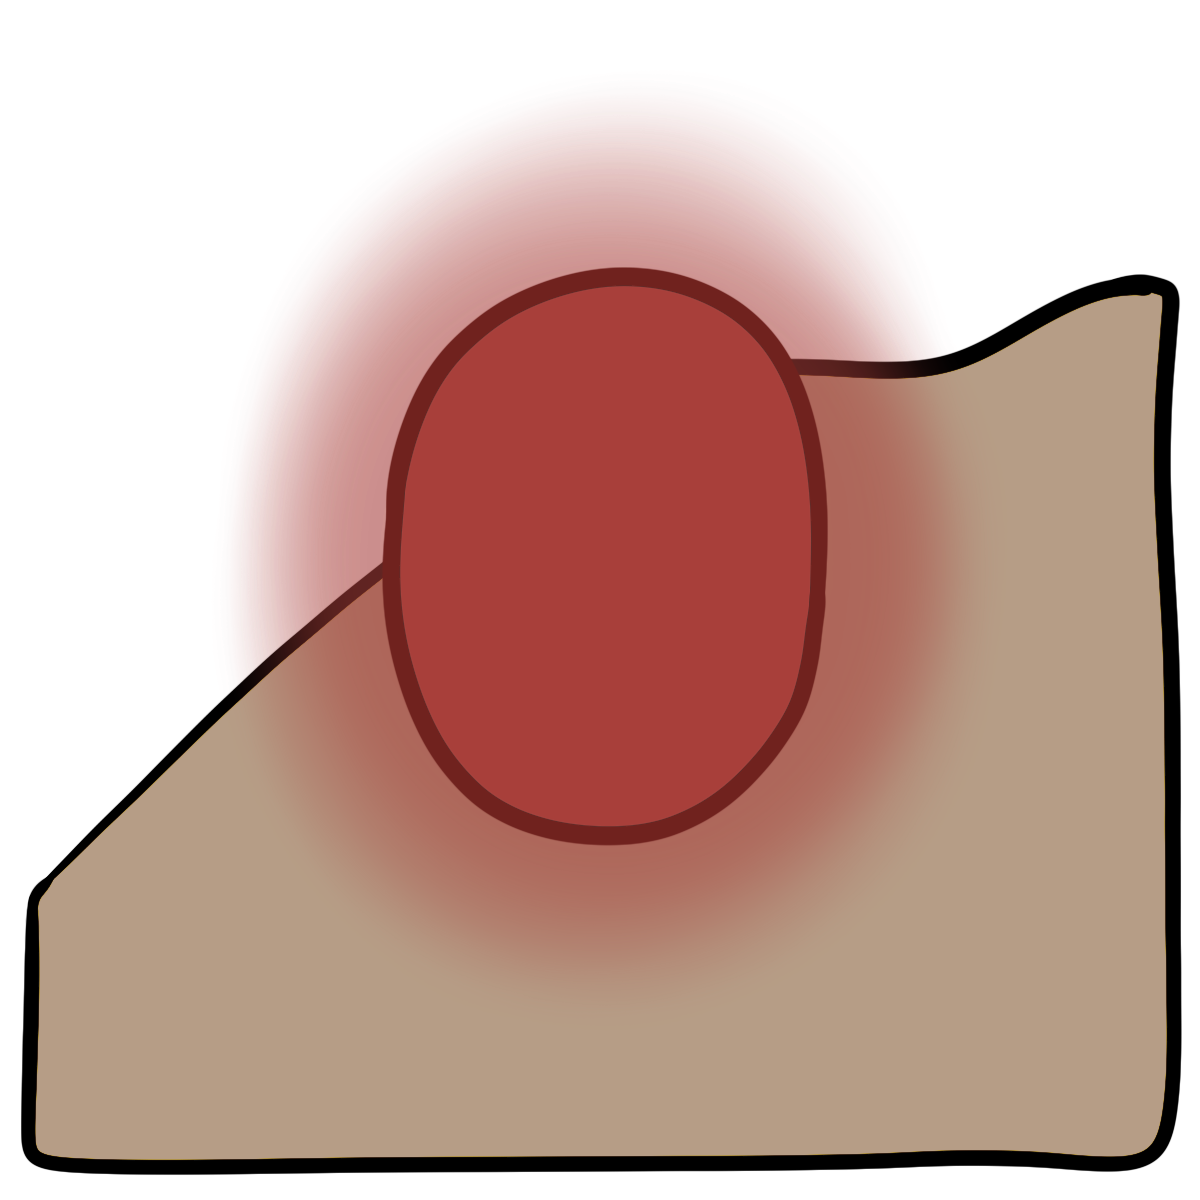 A glowing red oval. Curved beige skin fills the bottom half of the background.